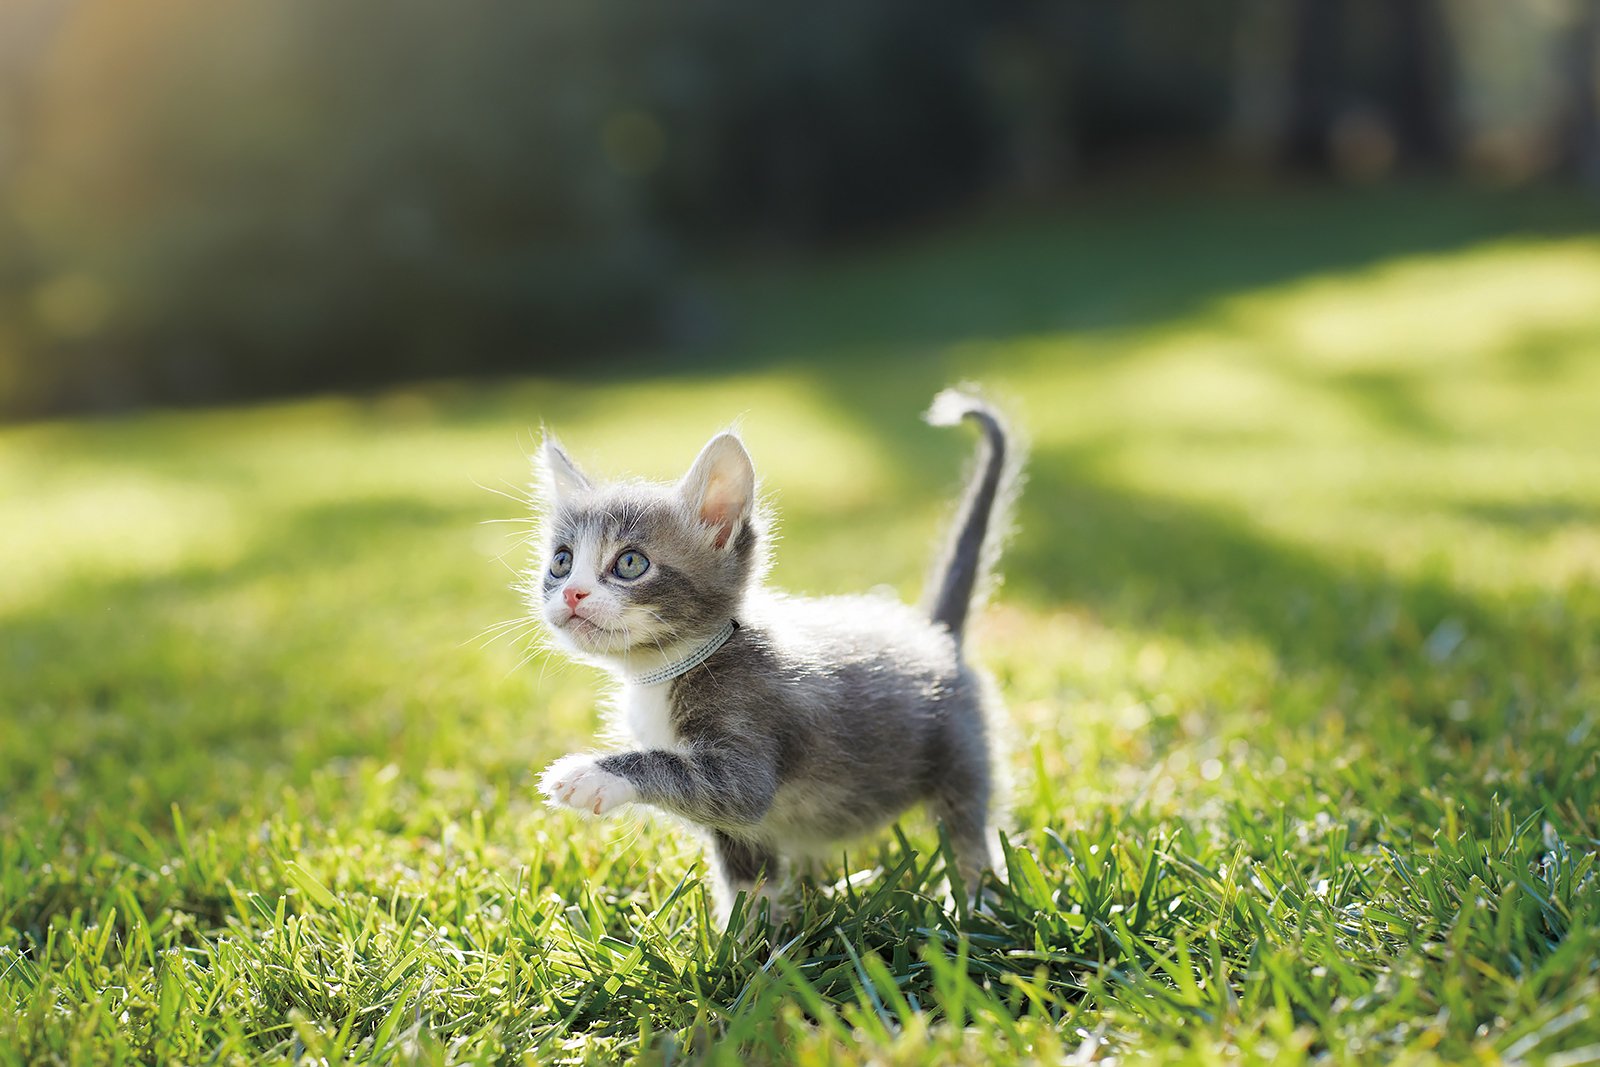 A small grey and white kitten is walking on lush green grass. The kitten has one paw raised, appears to be looking curiously to the side, and is bathed in soft, natural sunlight. The background is blurred with hints of trees and foliage.